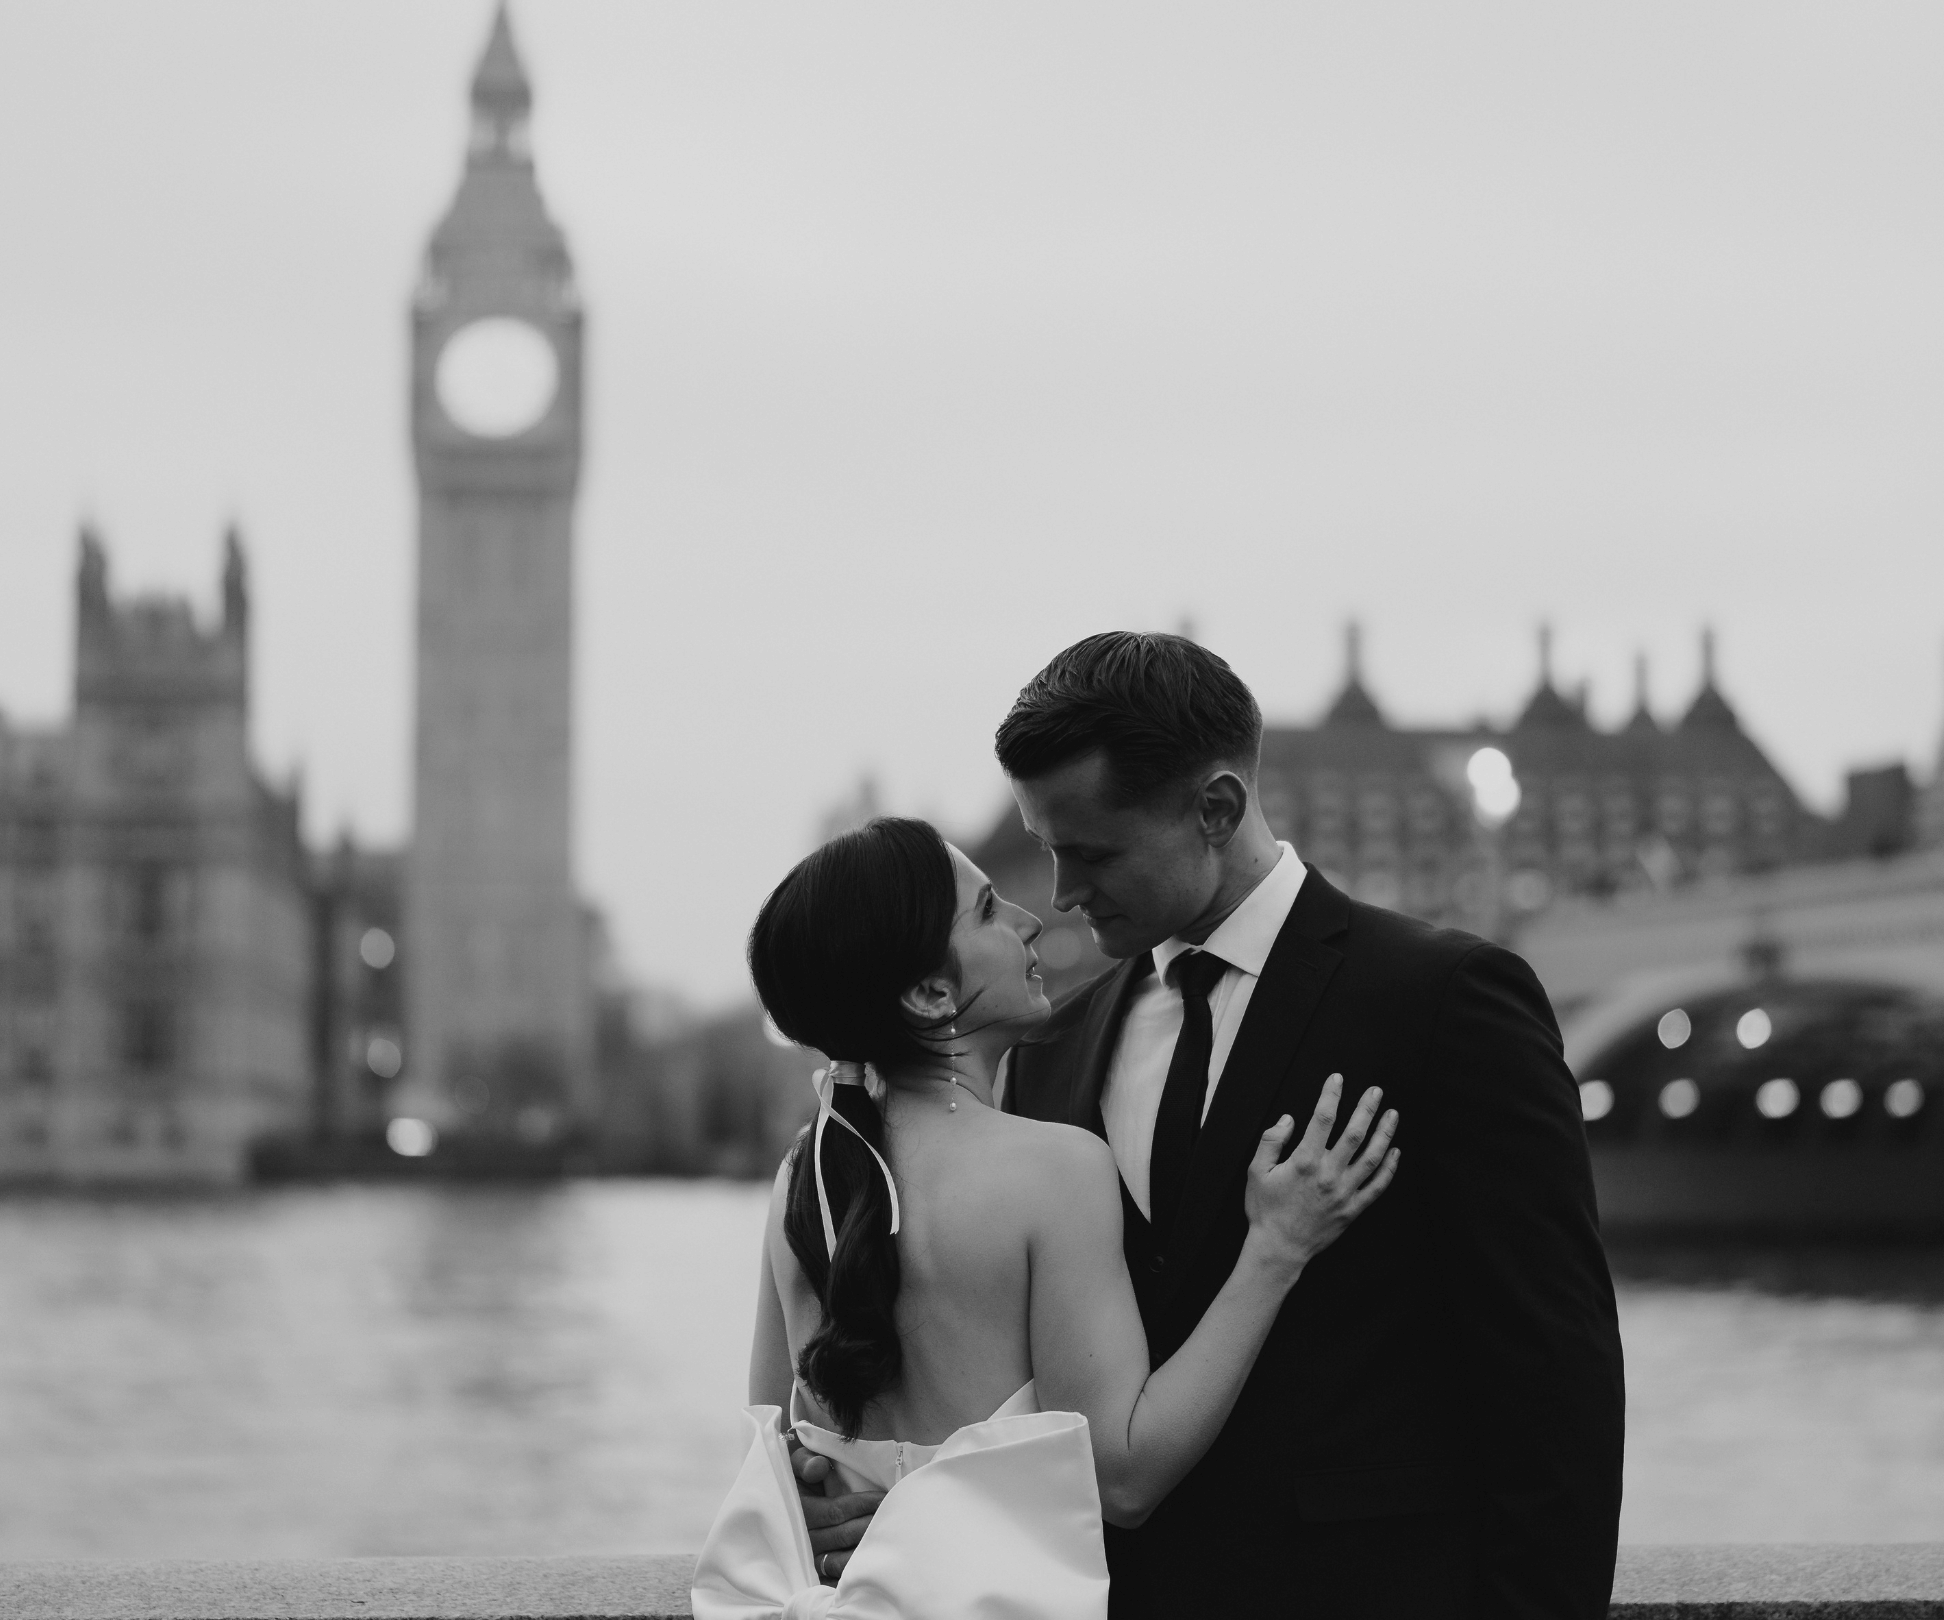 The Ultimate Guide to Planning an Affordable London Wedding: Save Without Sacrifice